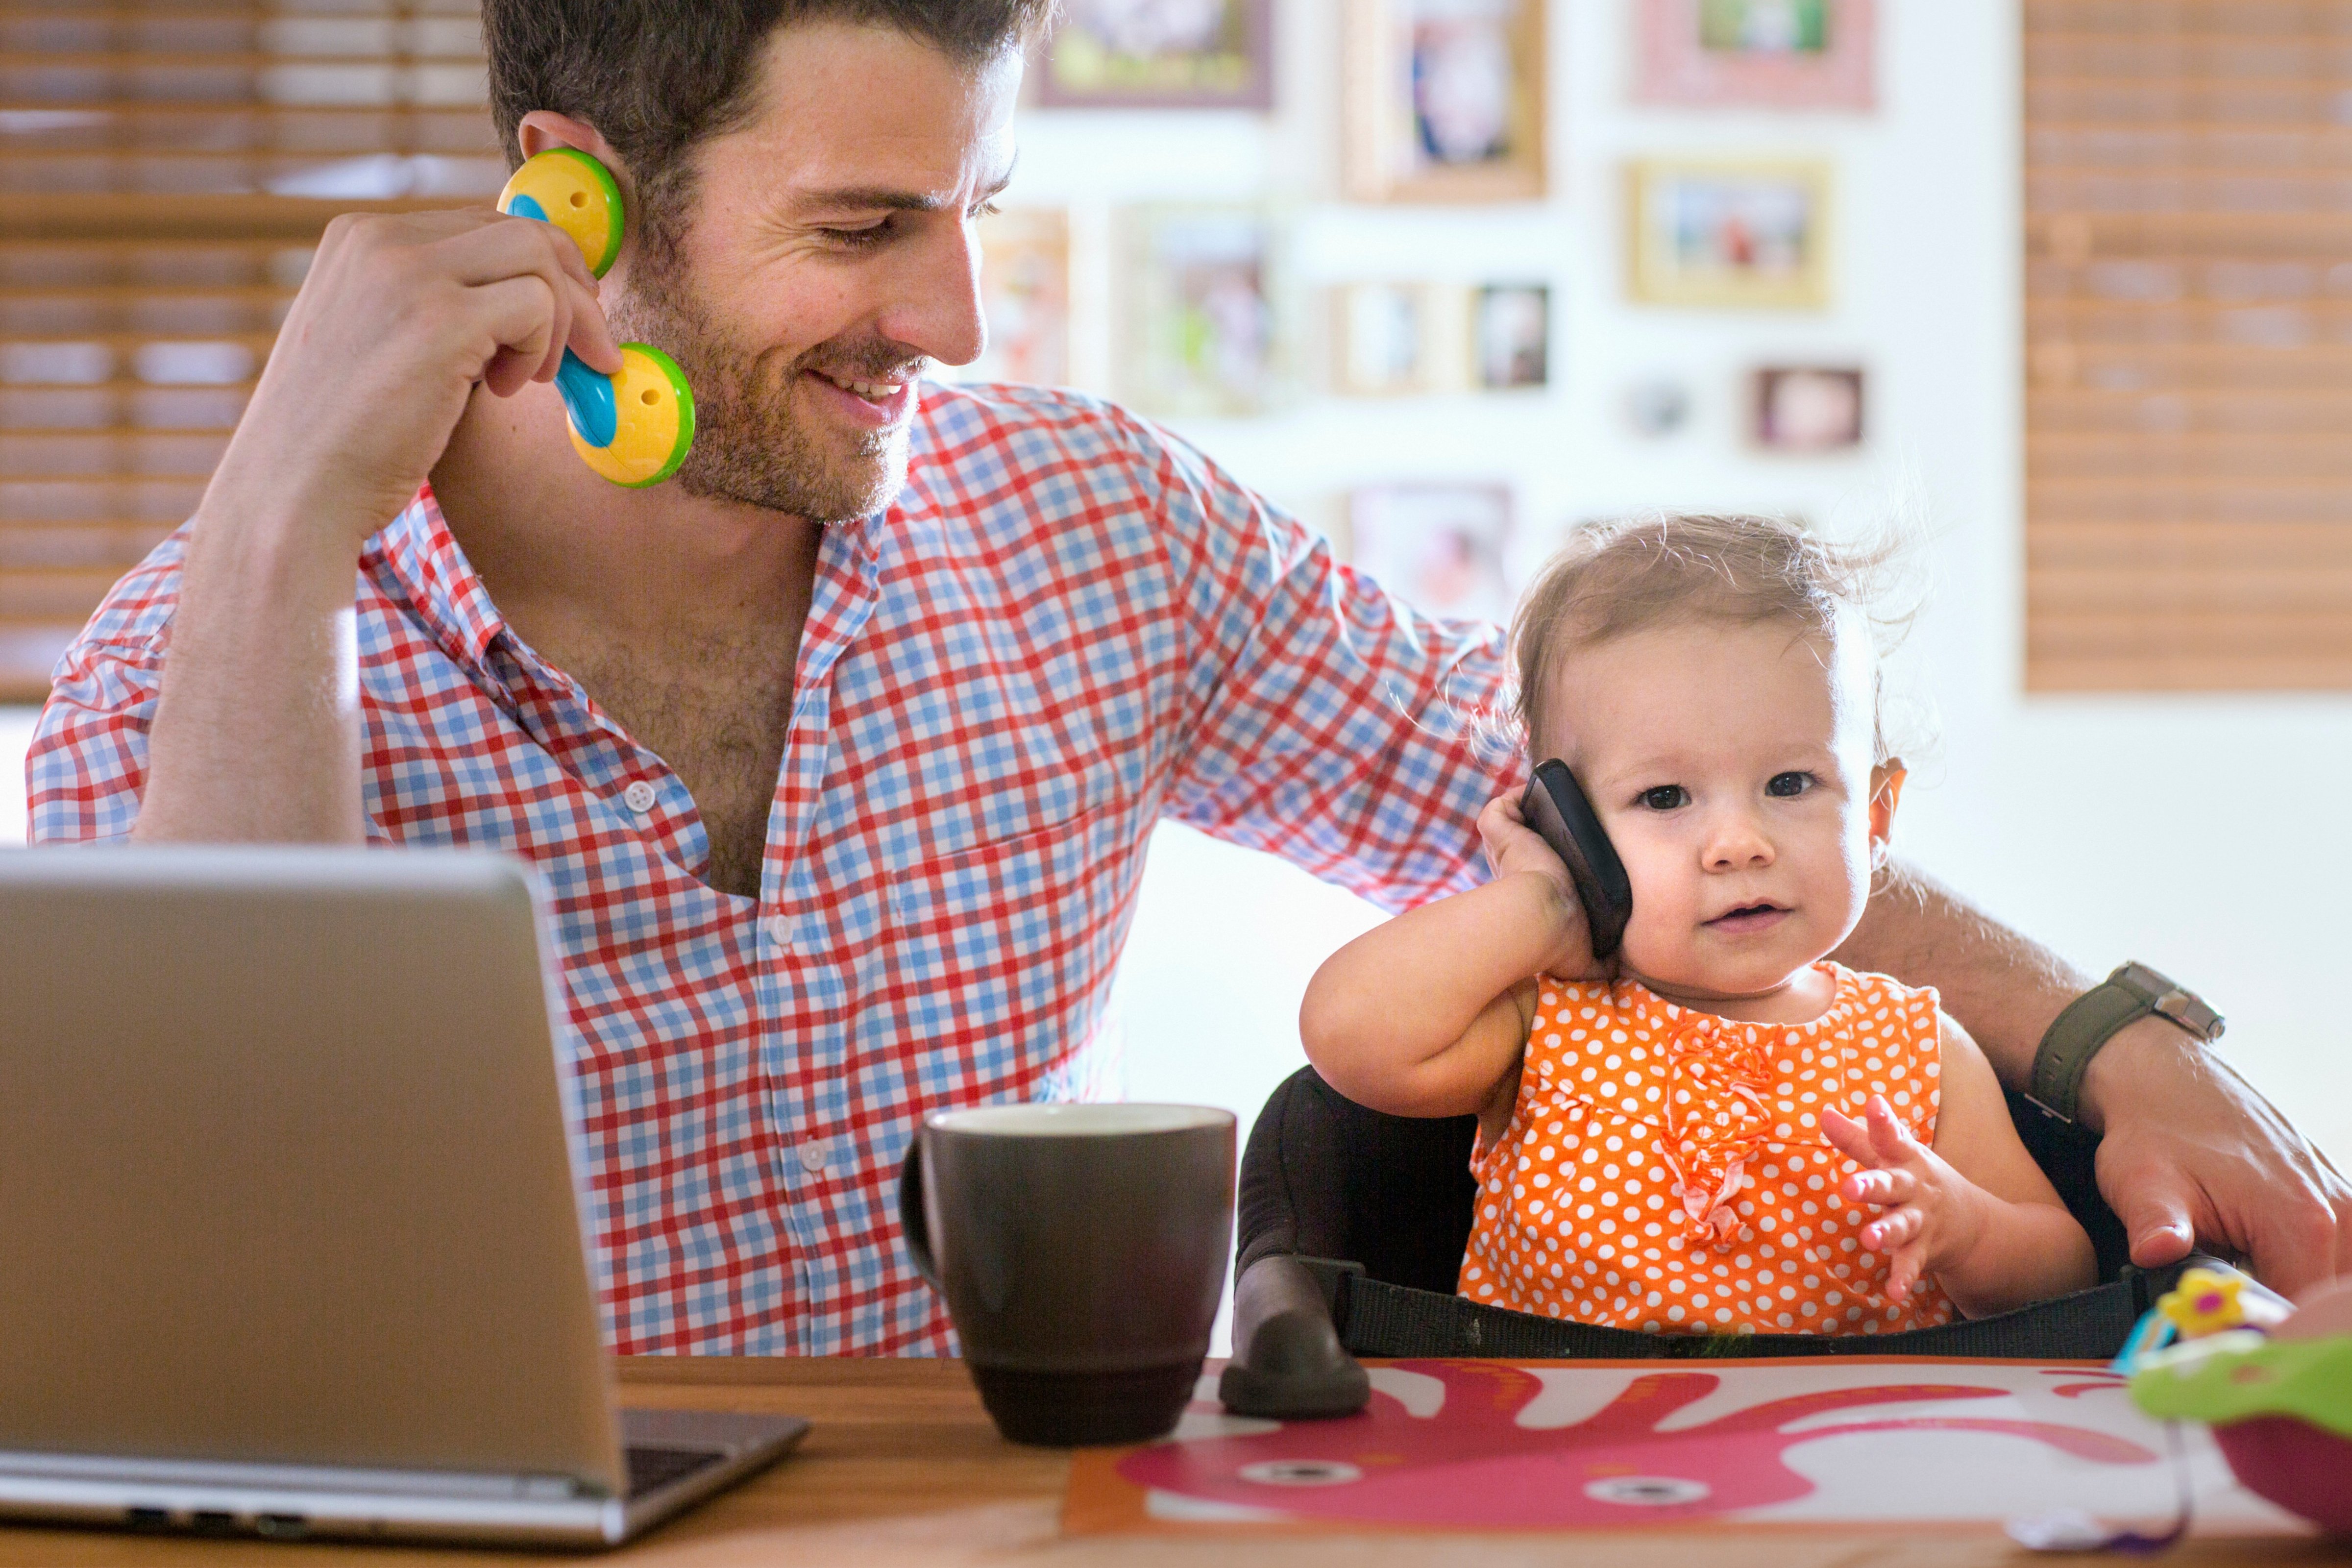 "Paternity leave is not only good for families, it’s good for business."